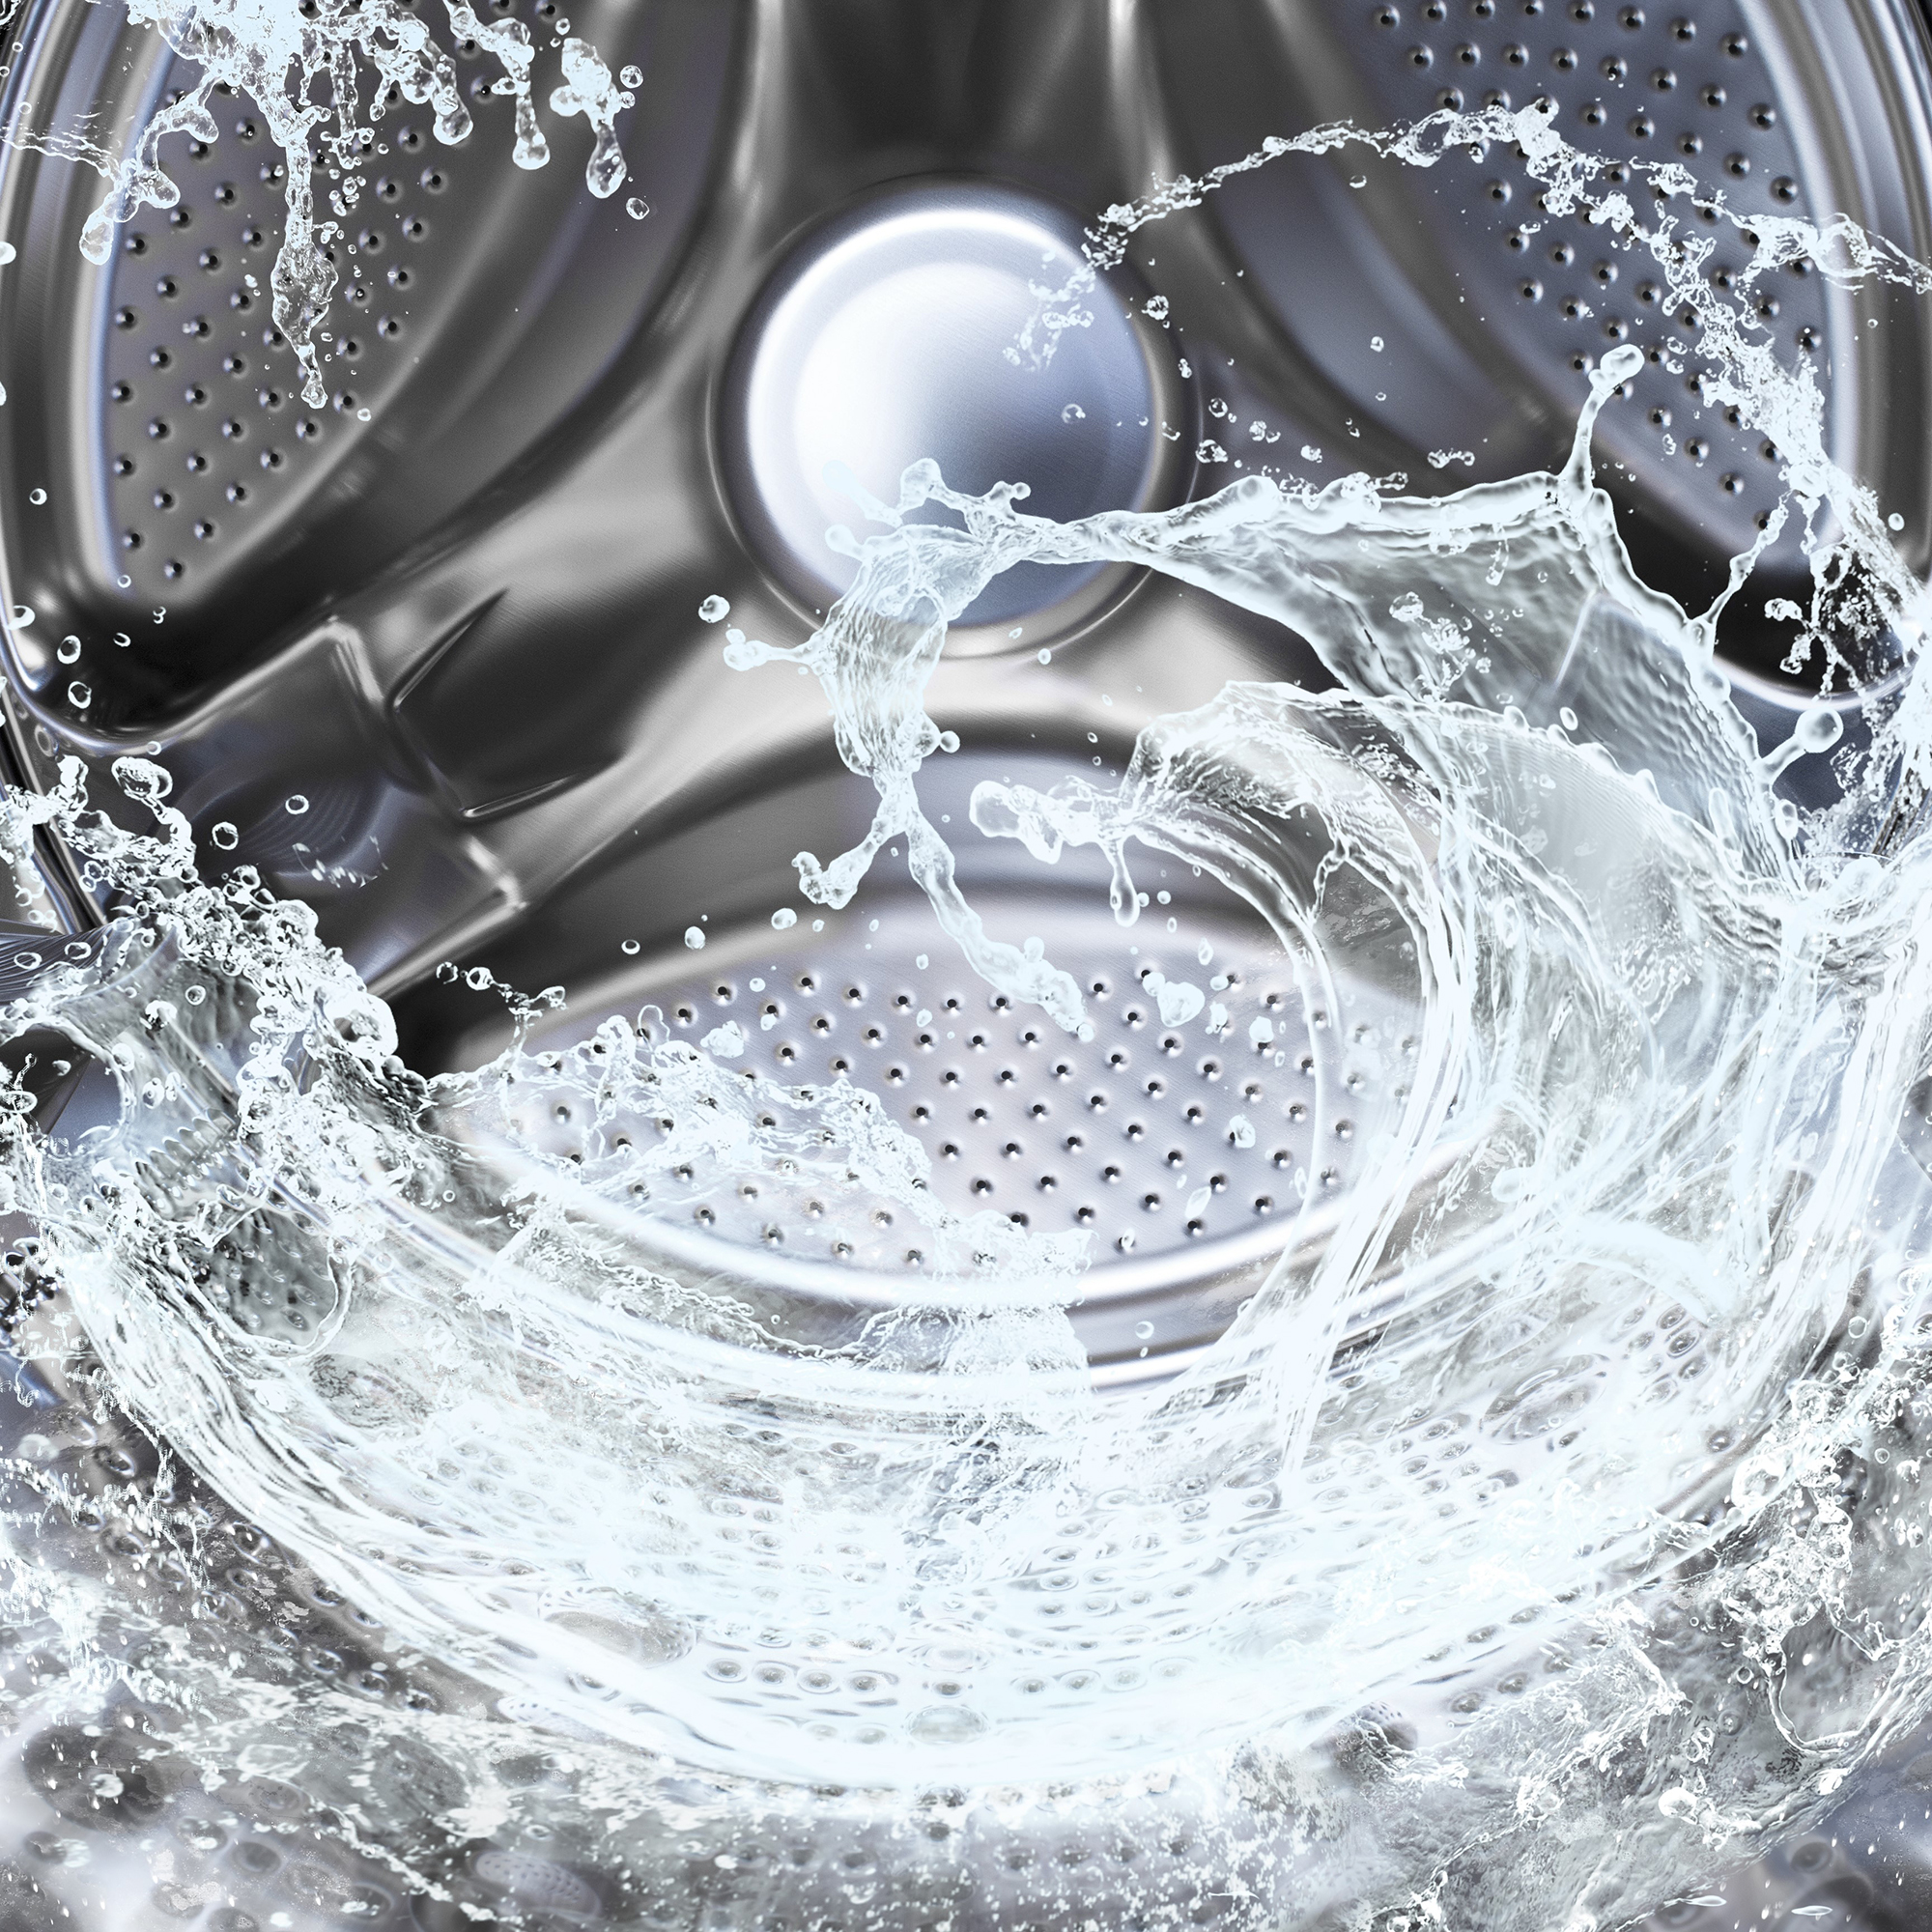 Washing machine with antimicrobial surface